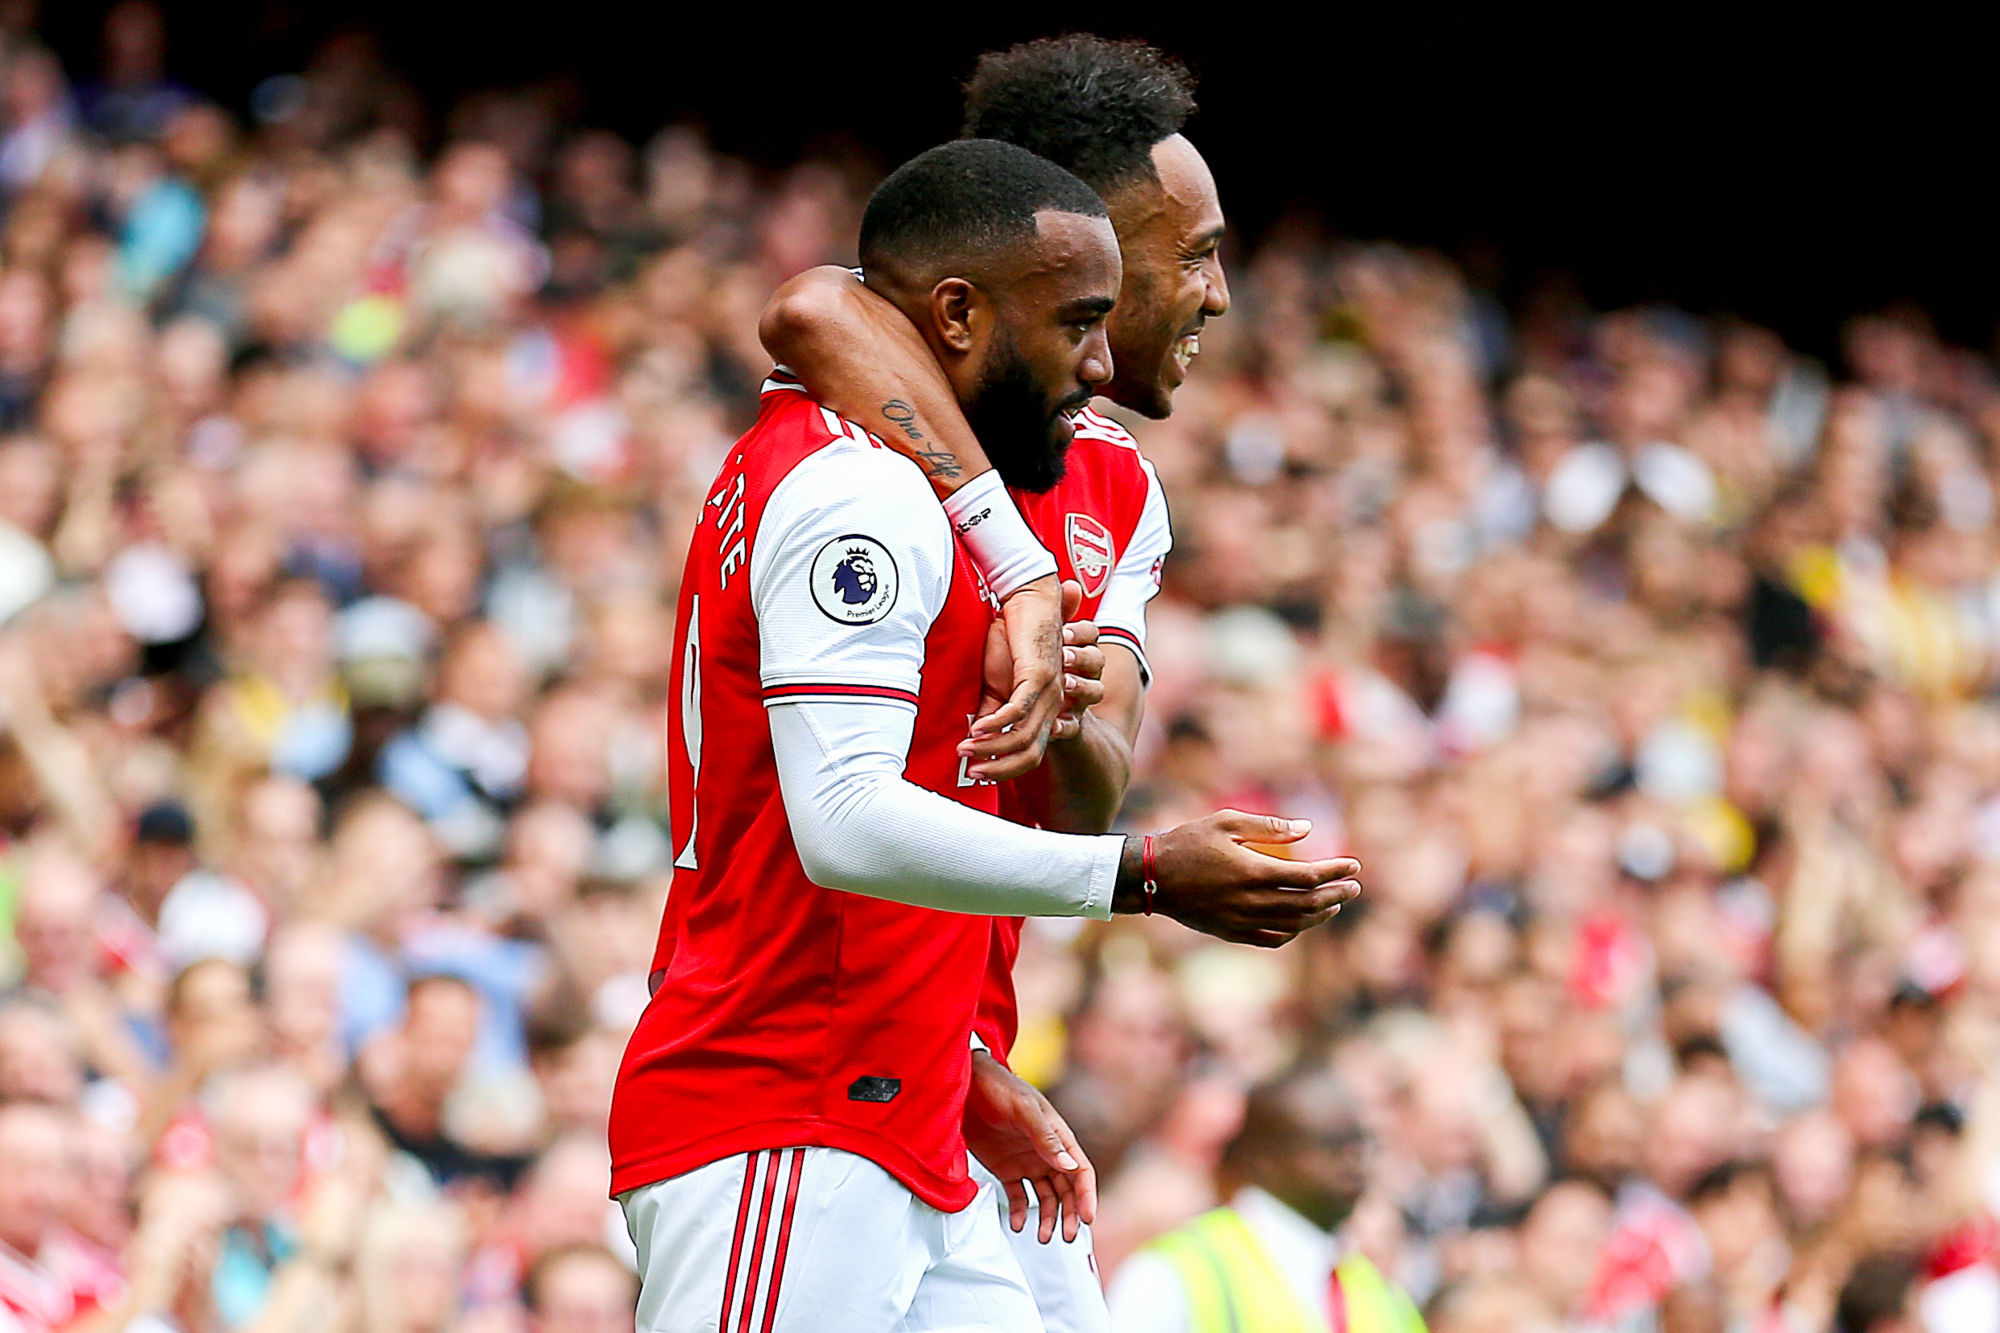 Arsenal's Alexandre Lacazette (left) celebrates scoring his side's first goal of the game with team-mate Pierre-Emerick Aubameyang (right) during the Premier League match at The Emirates Stadium, London. On August 17th, 2019. Photo : PA Images / Icon Sport